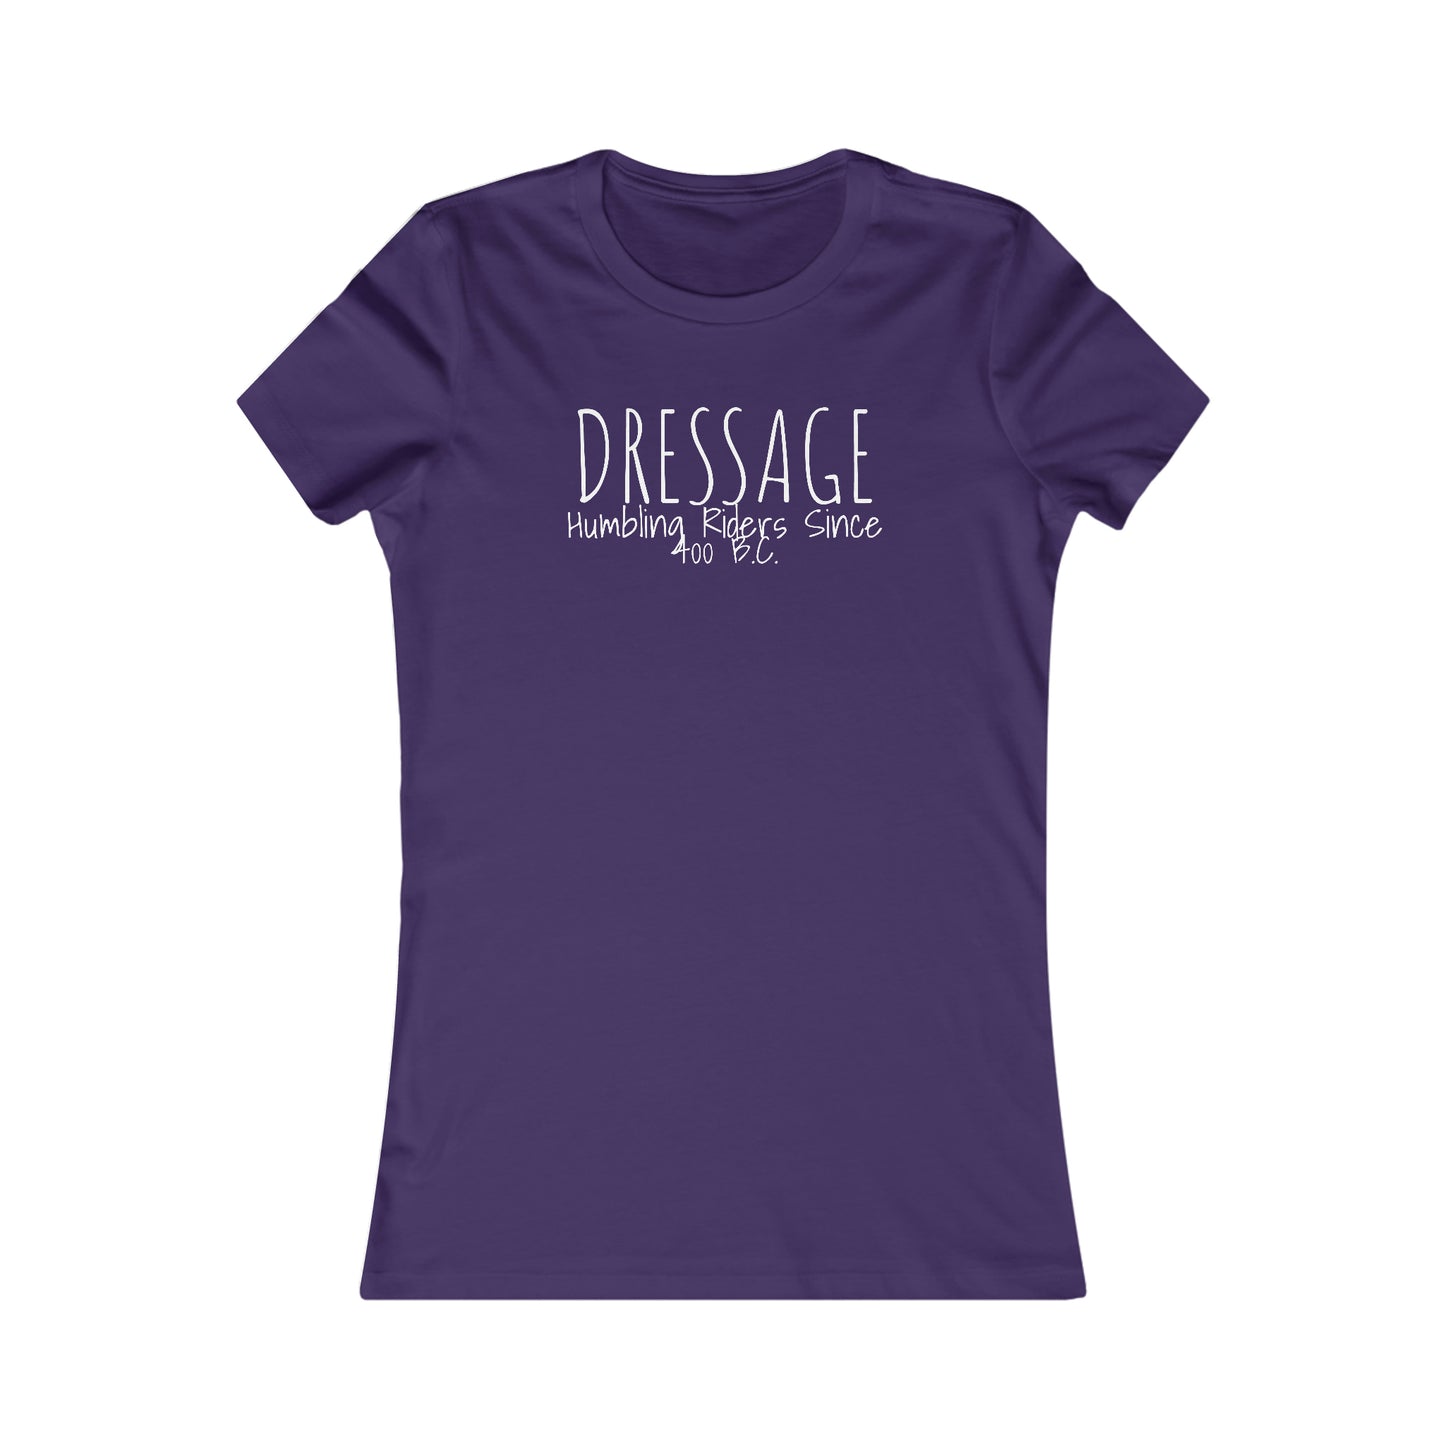 Shirt - Dressage, Humbling Riders Since 400 B.C. - Fitted T